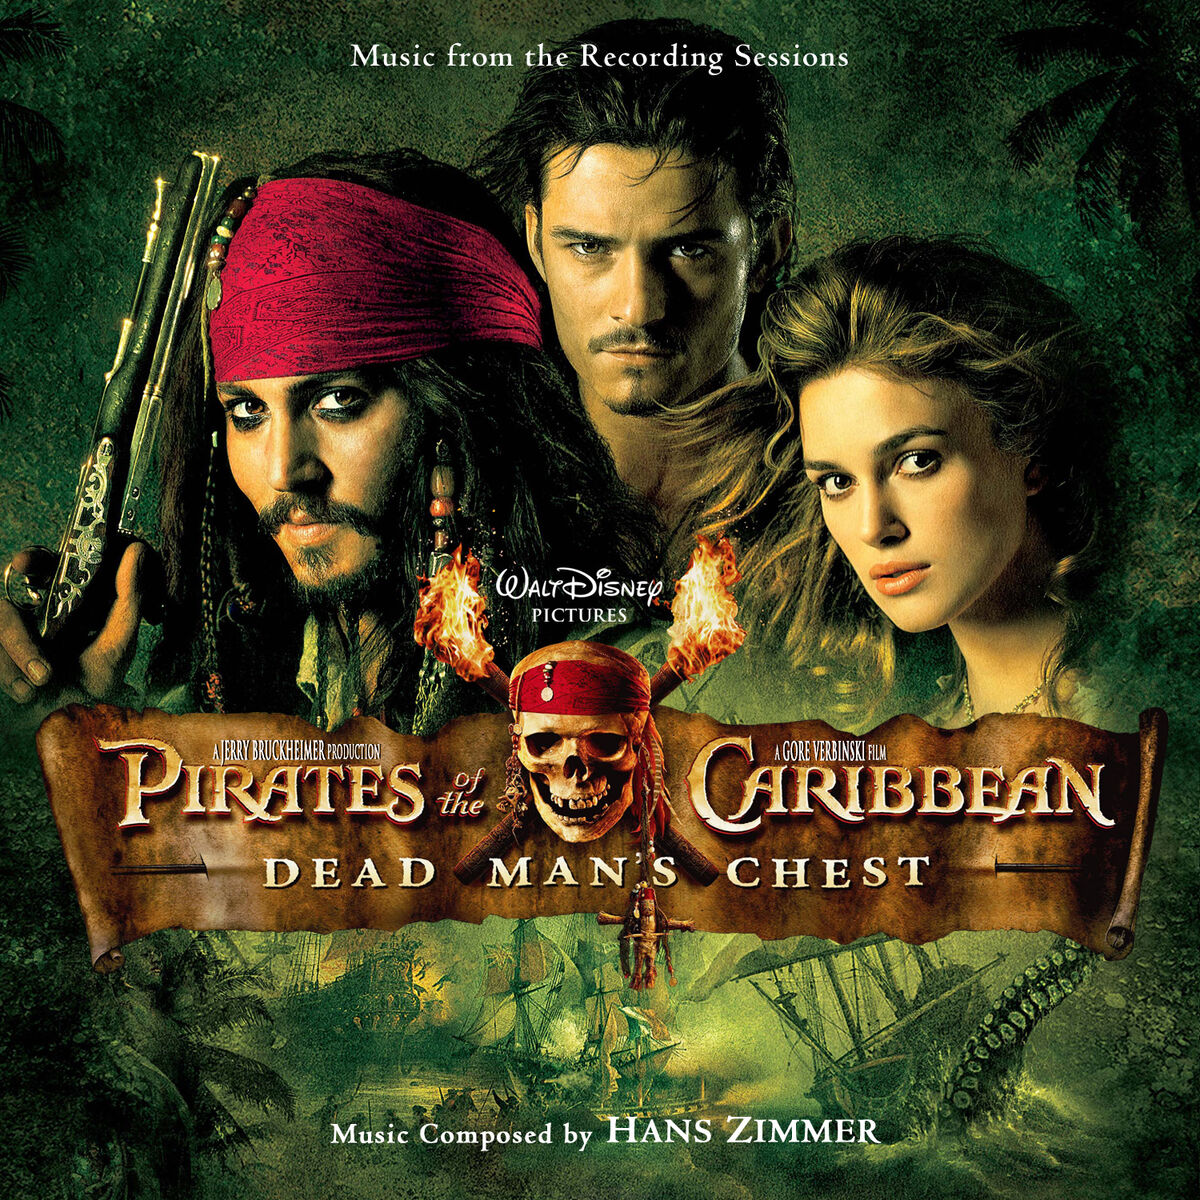 pirates-of-the-caribbean-dead-man-s-chest-complete-motion-picture-score-pirates-of-the